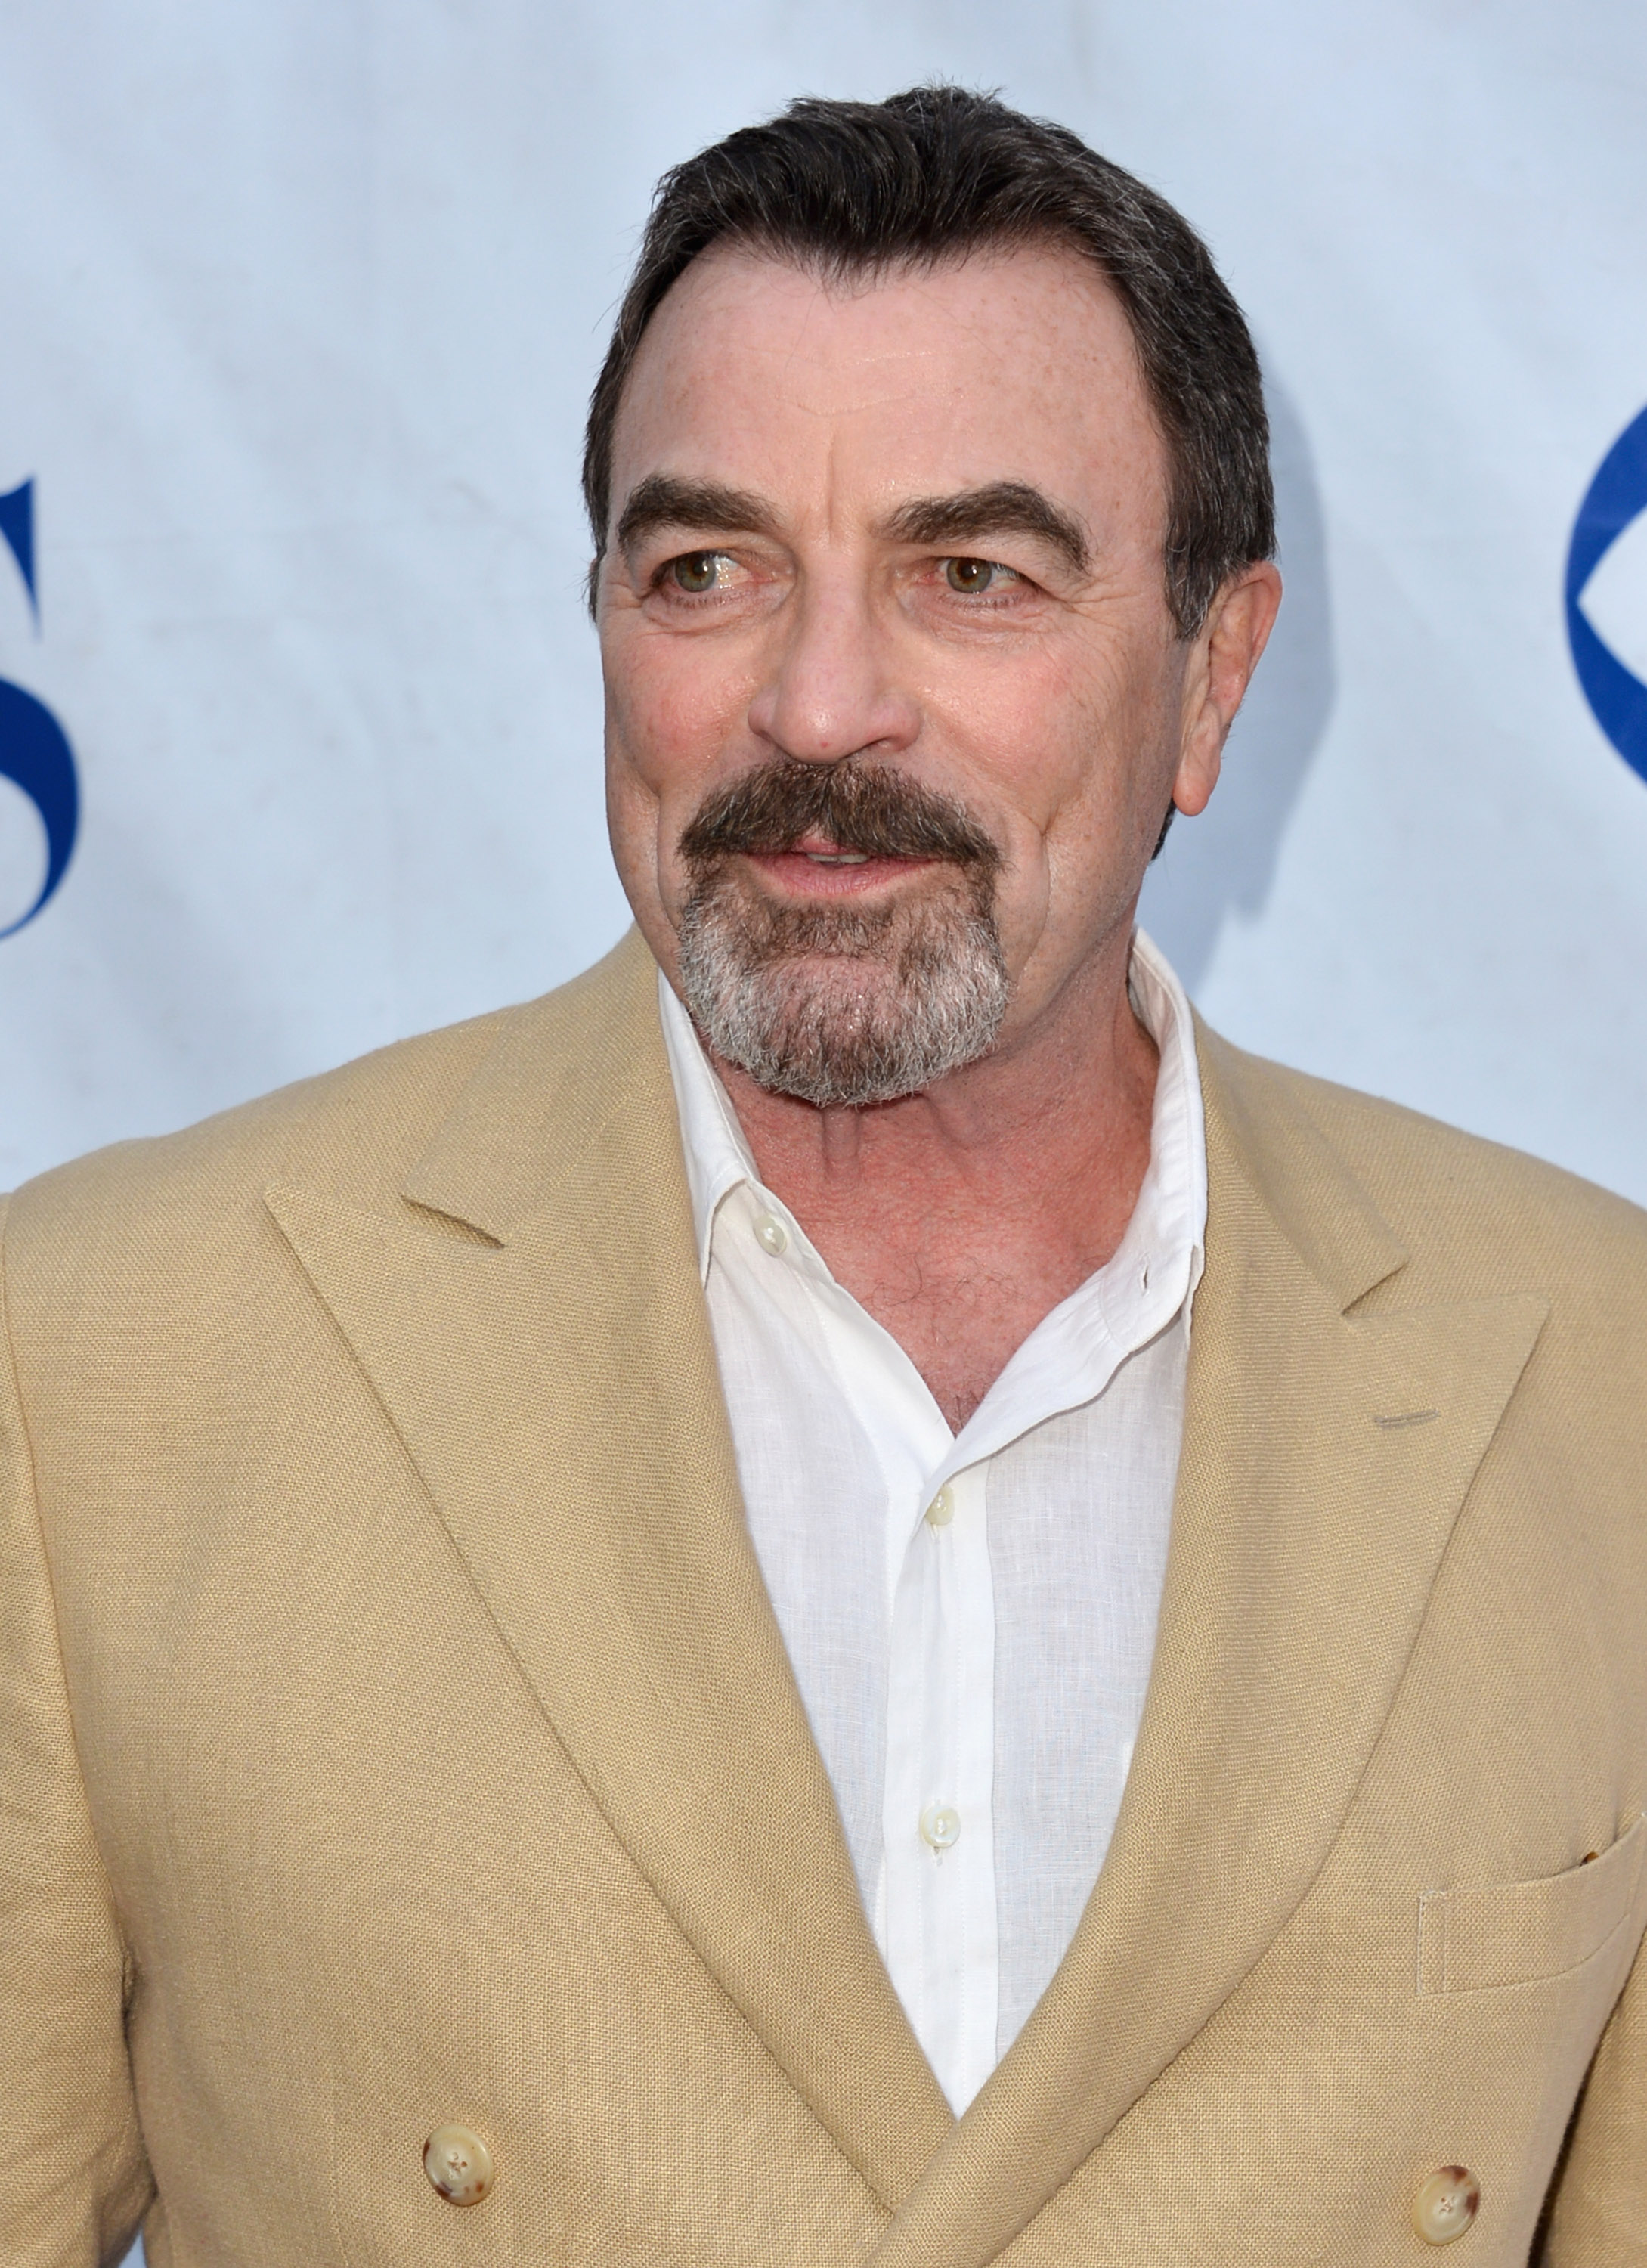 Tom Selleck & the NRA: 5 Fast Facts You Need to Know | Heavy.com